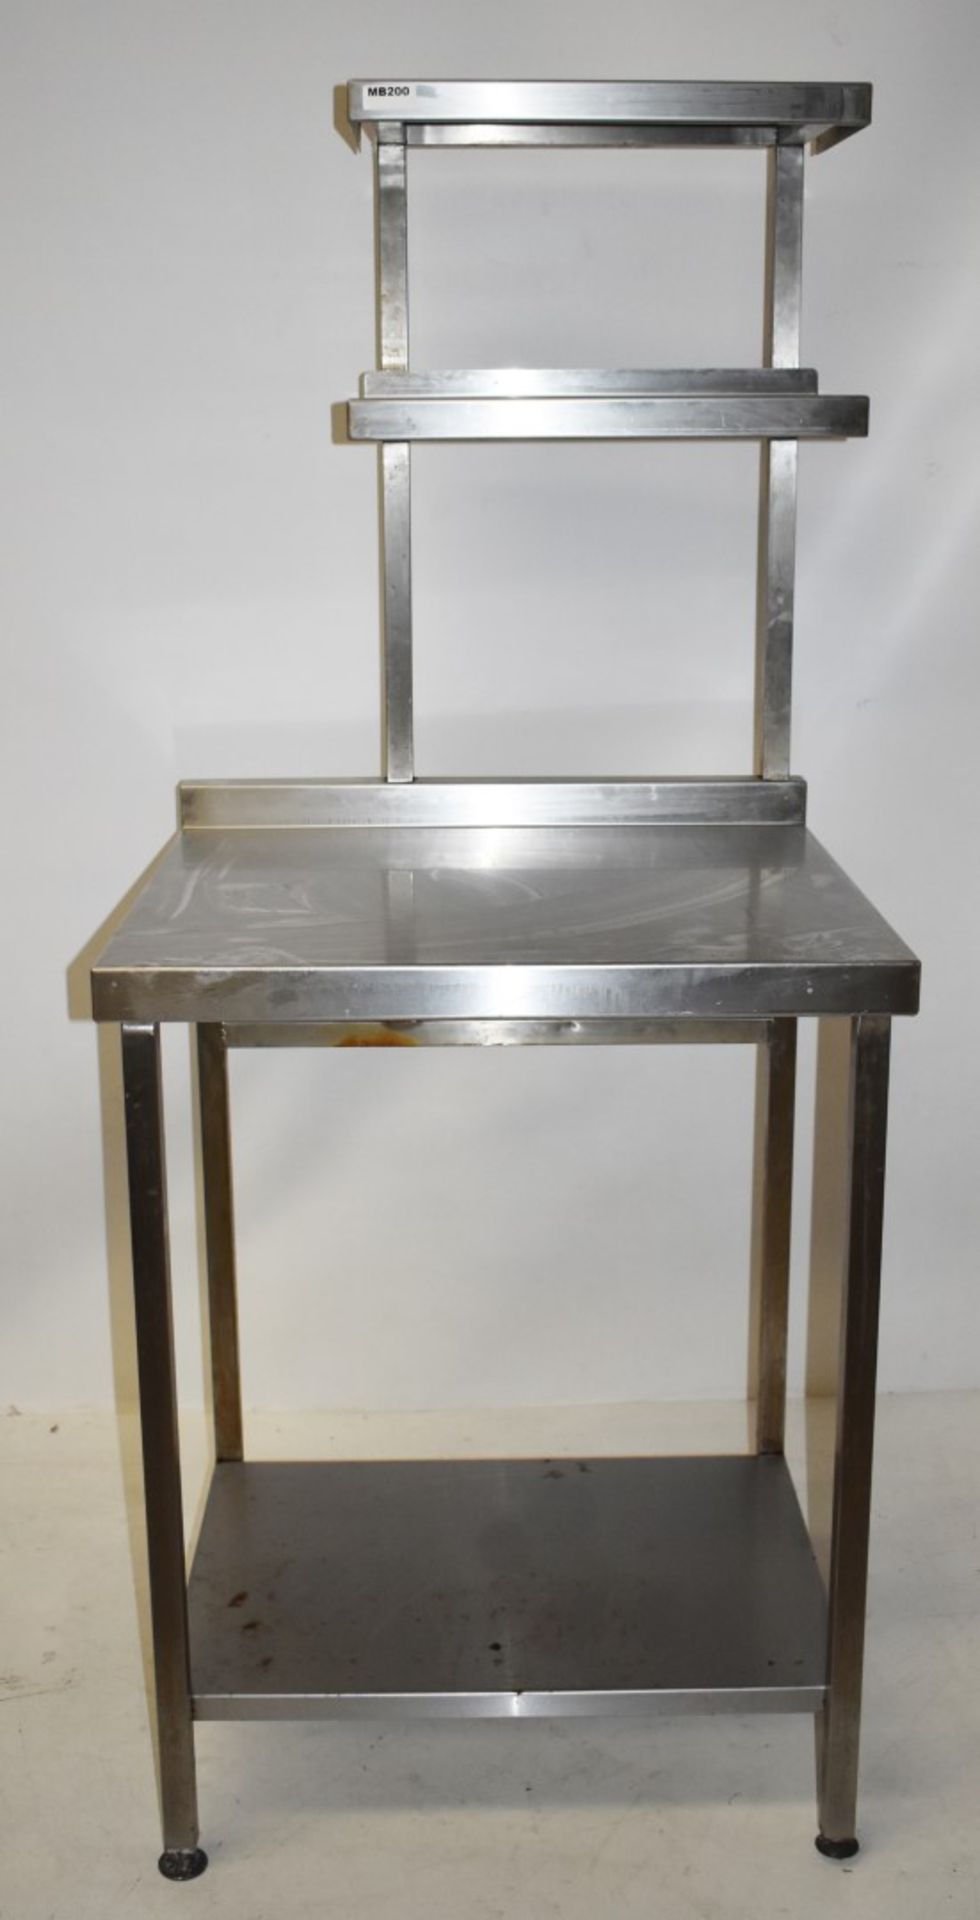 1 Stainless Steel Prep Bench With Undershelf and Overhead Shelves - H92/169 x W71 x D65 cms - - Image 2 of 4